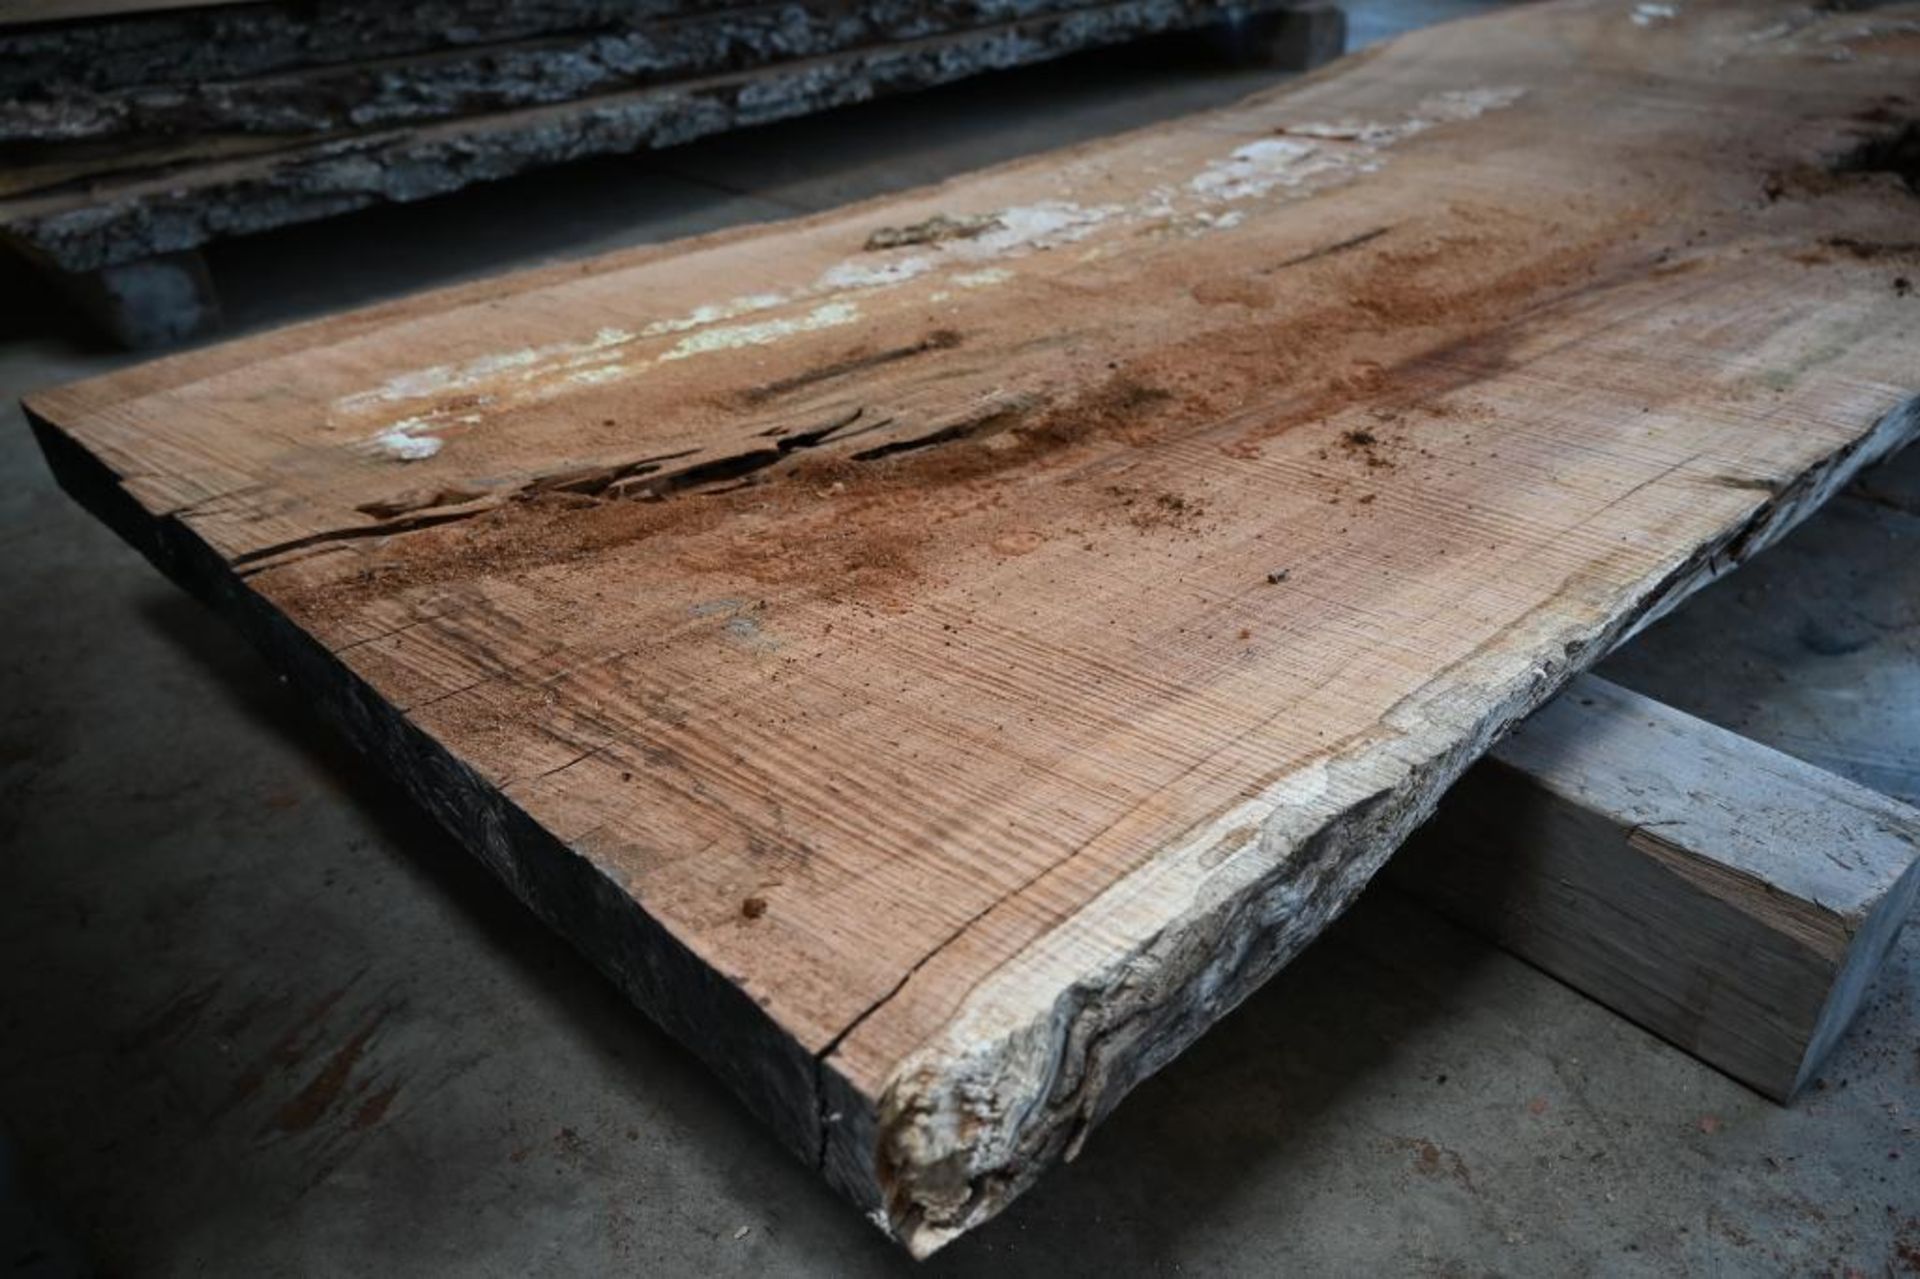 Rough Cut Cherry Table Top Slab - Image 3 of 6